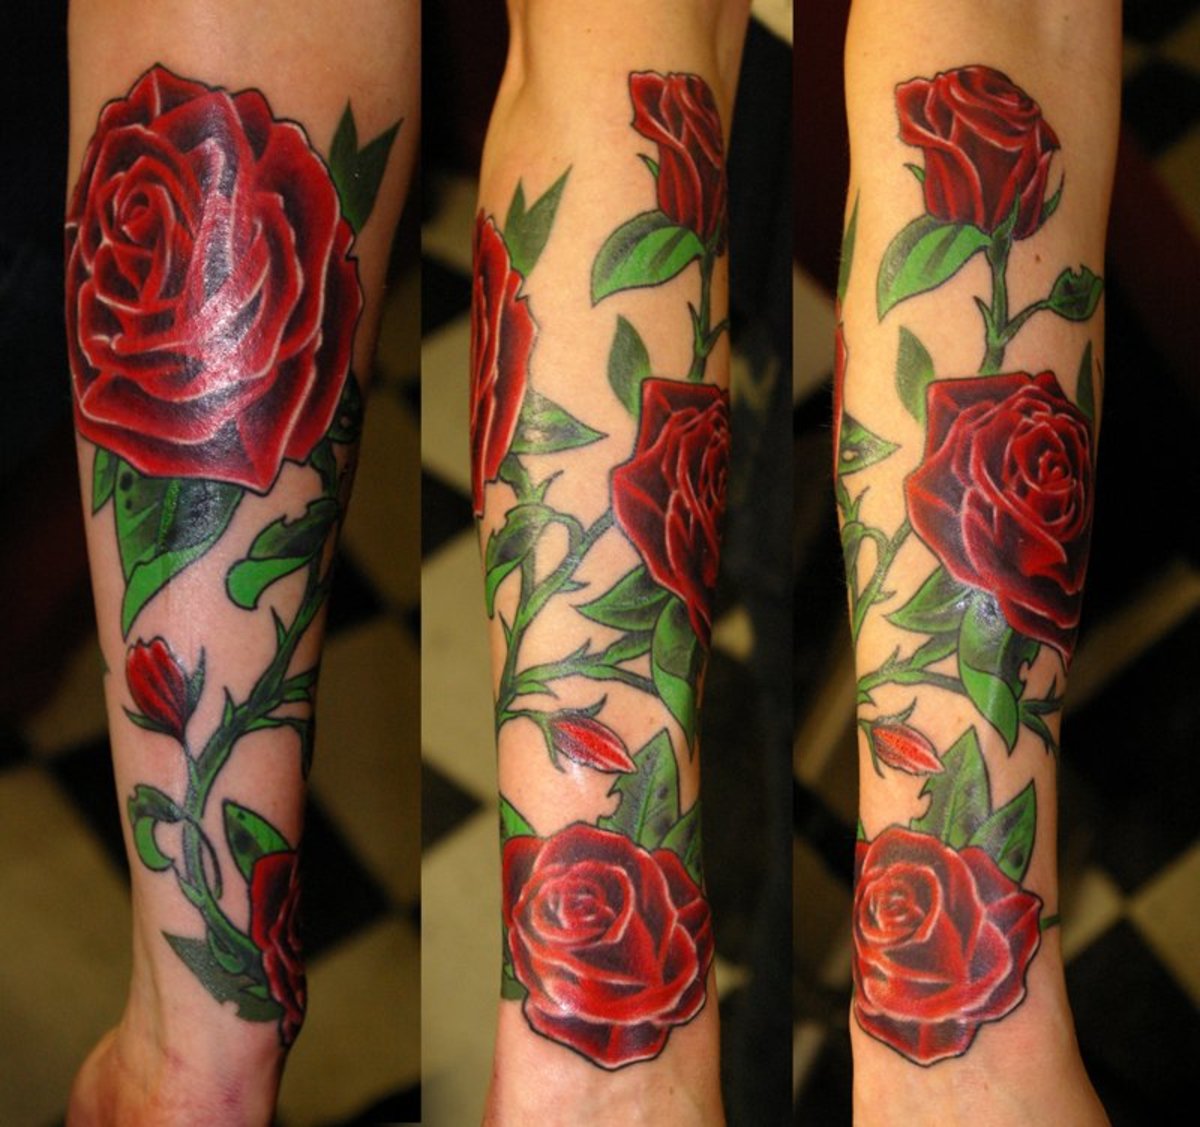 Meaning Of Rose Tattoo Black Blue Purple And Other Roses Tattoos Hubpages,Cooking Chestnuts At Home